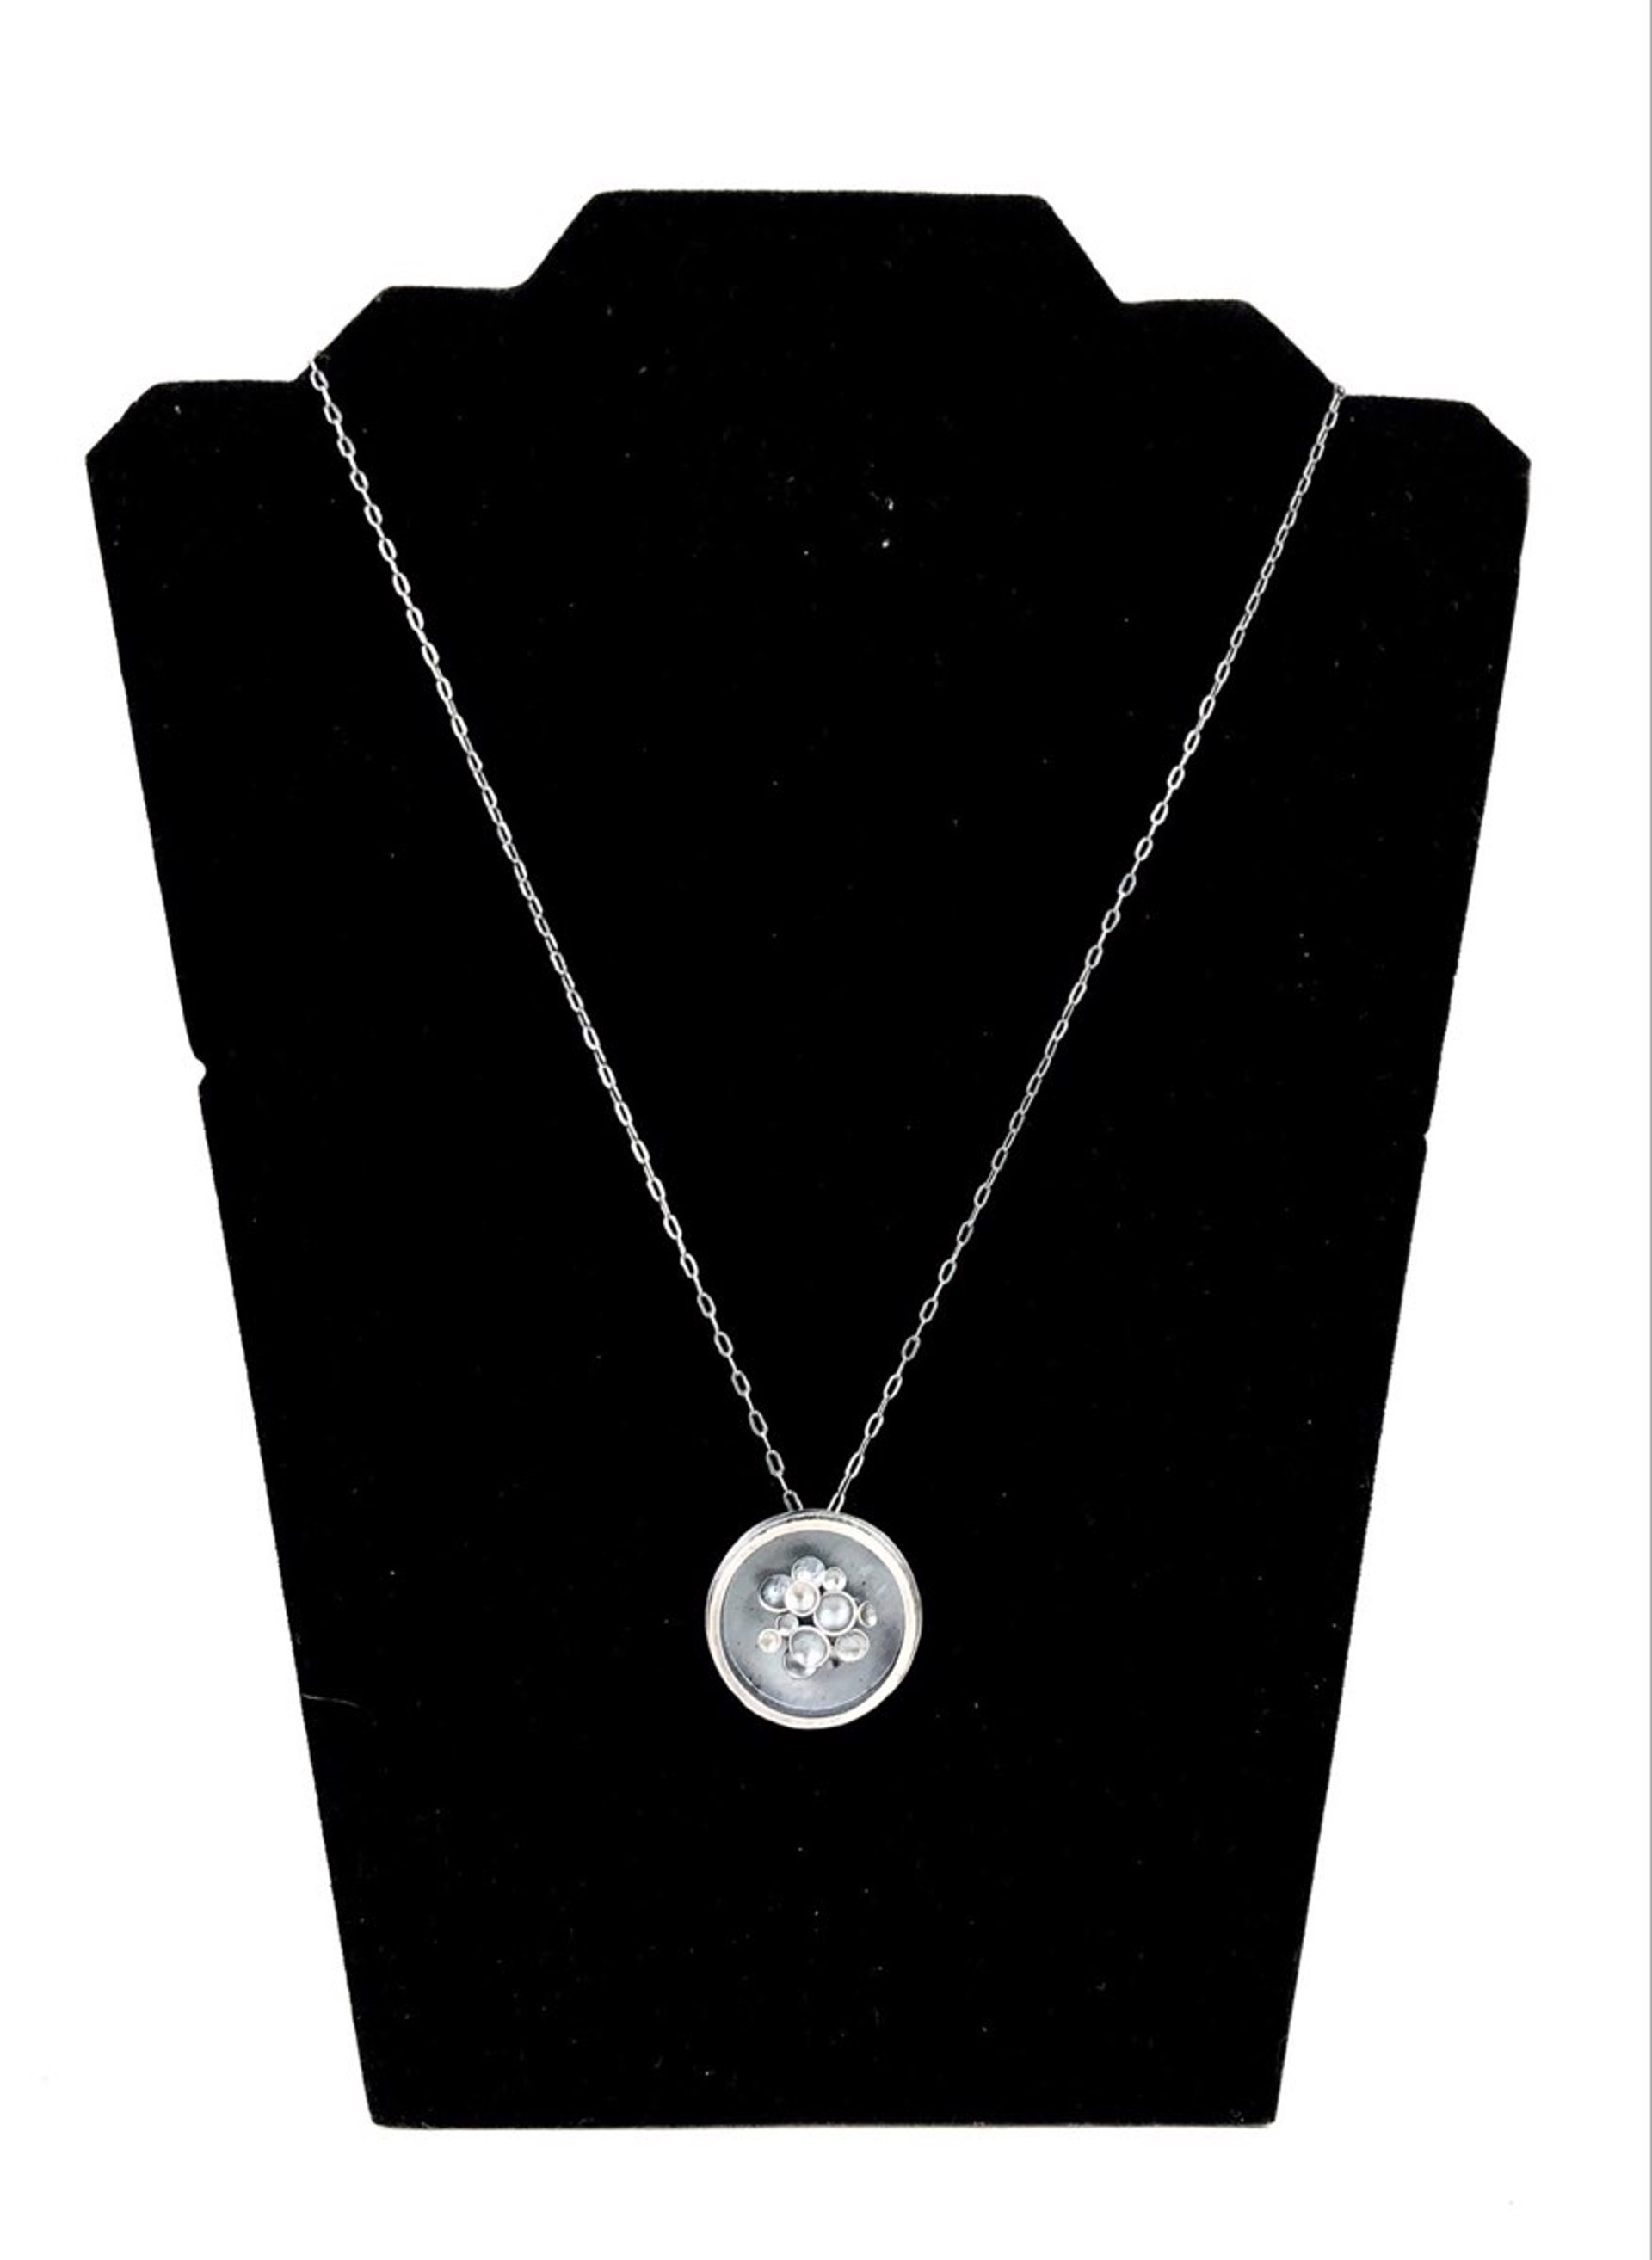 Mond Cups Pendant with Silver Chain by Theresa St. Romain